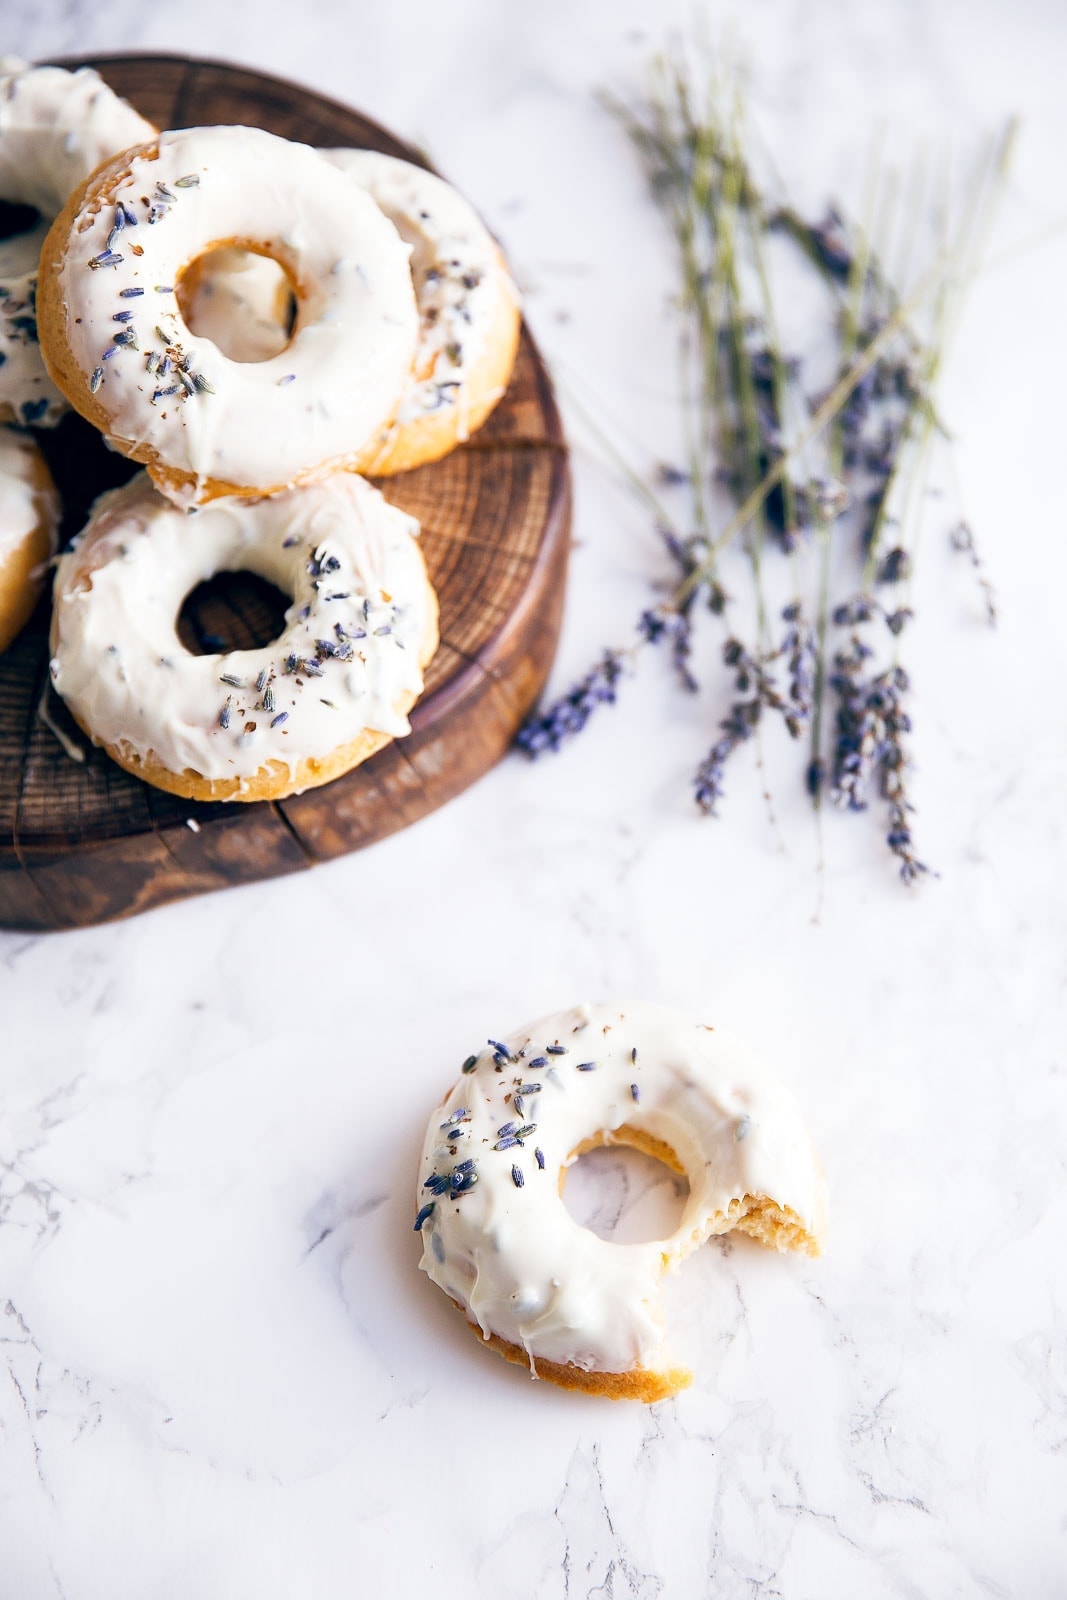 Celebrate spring with baked lemon donuts dipped in a lavender-infused white chocolate ganache!